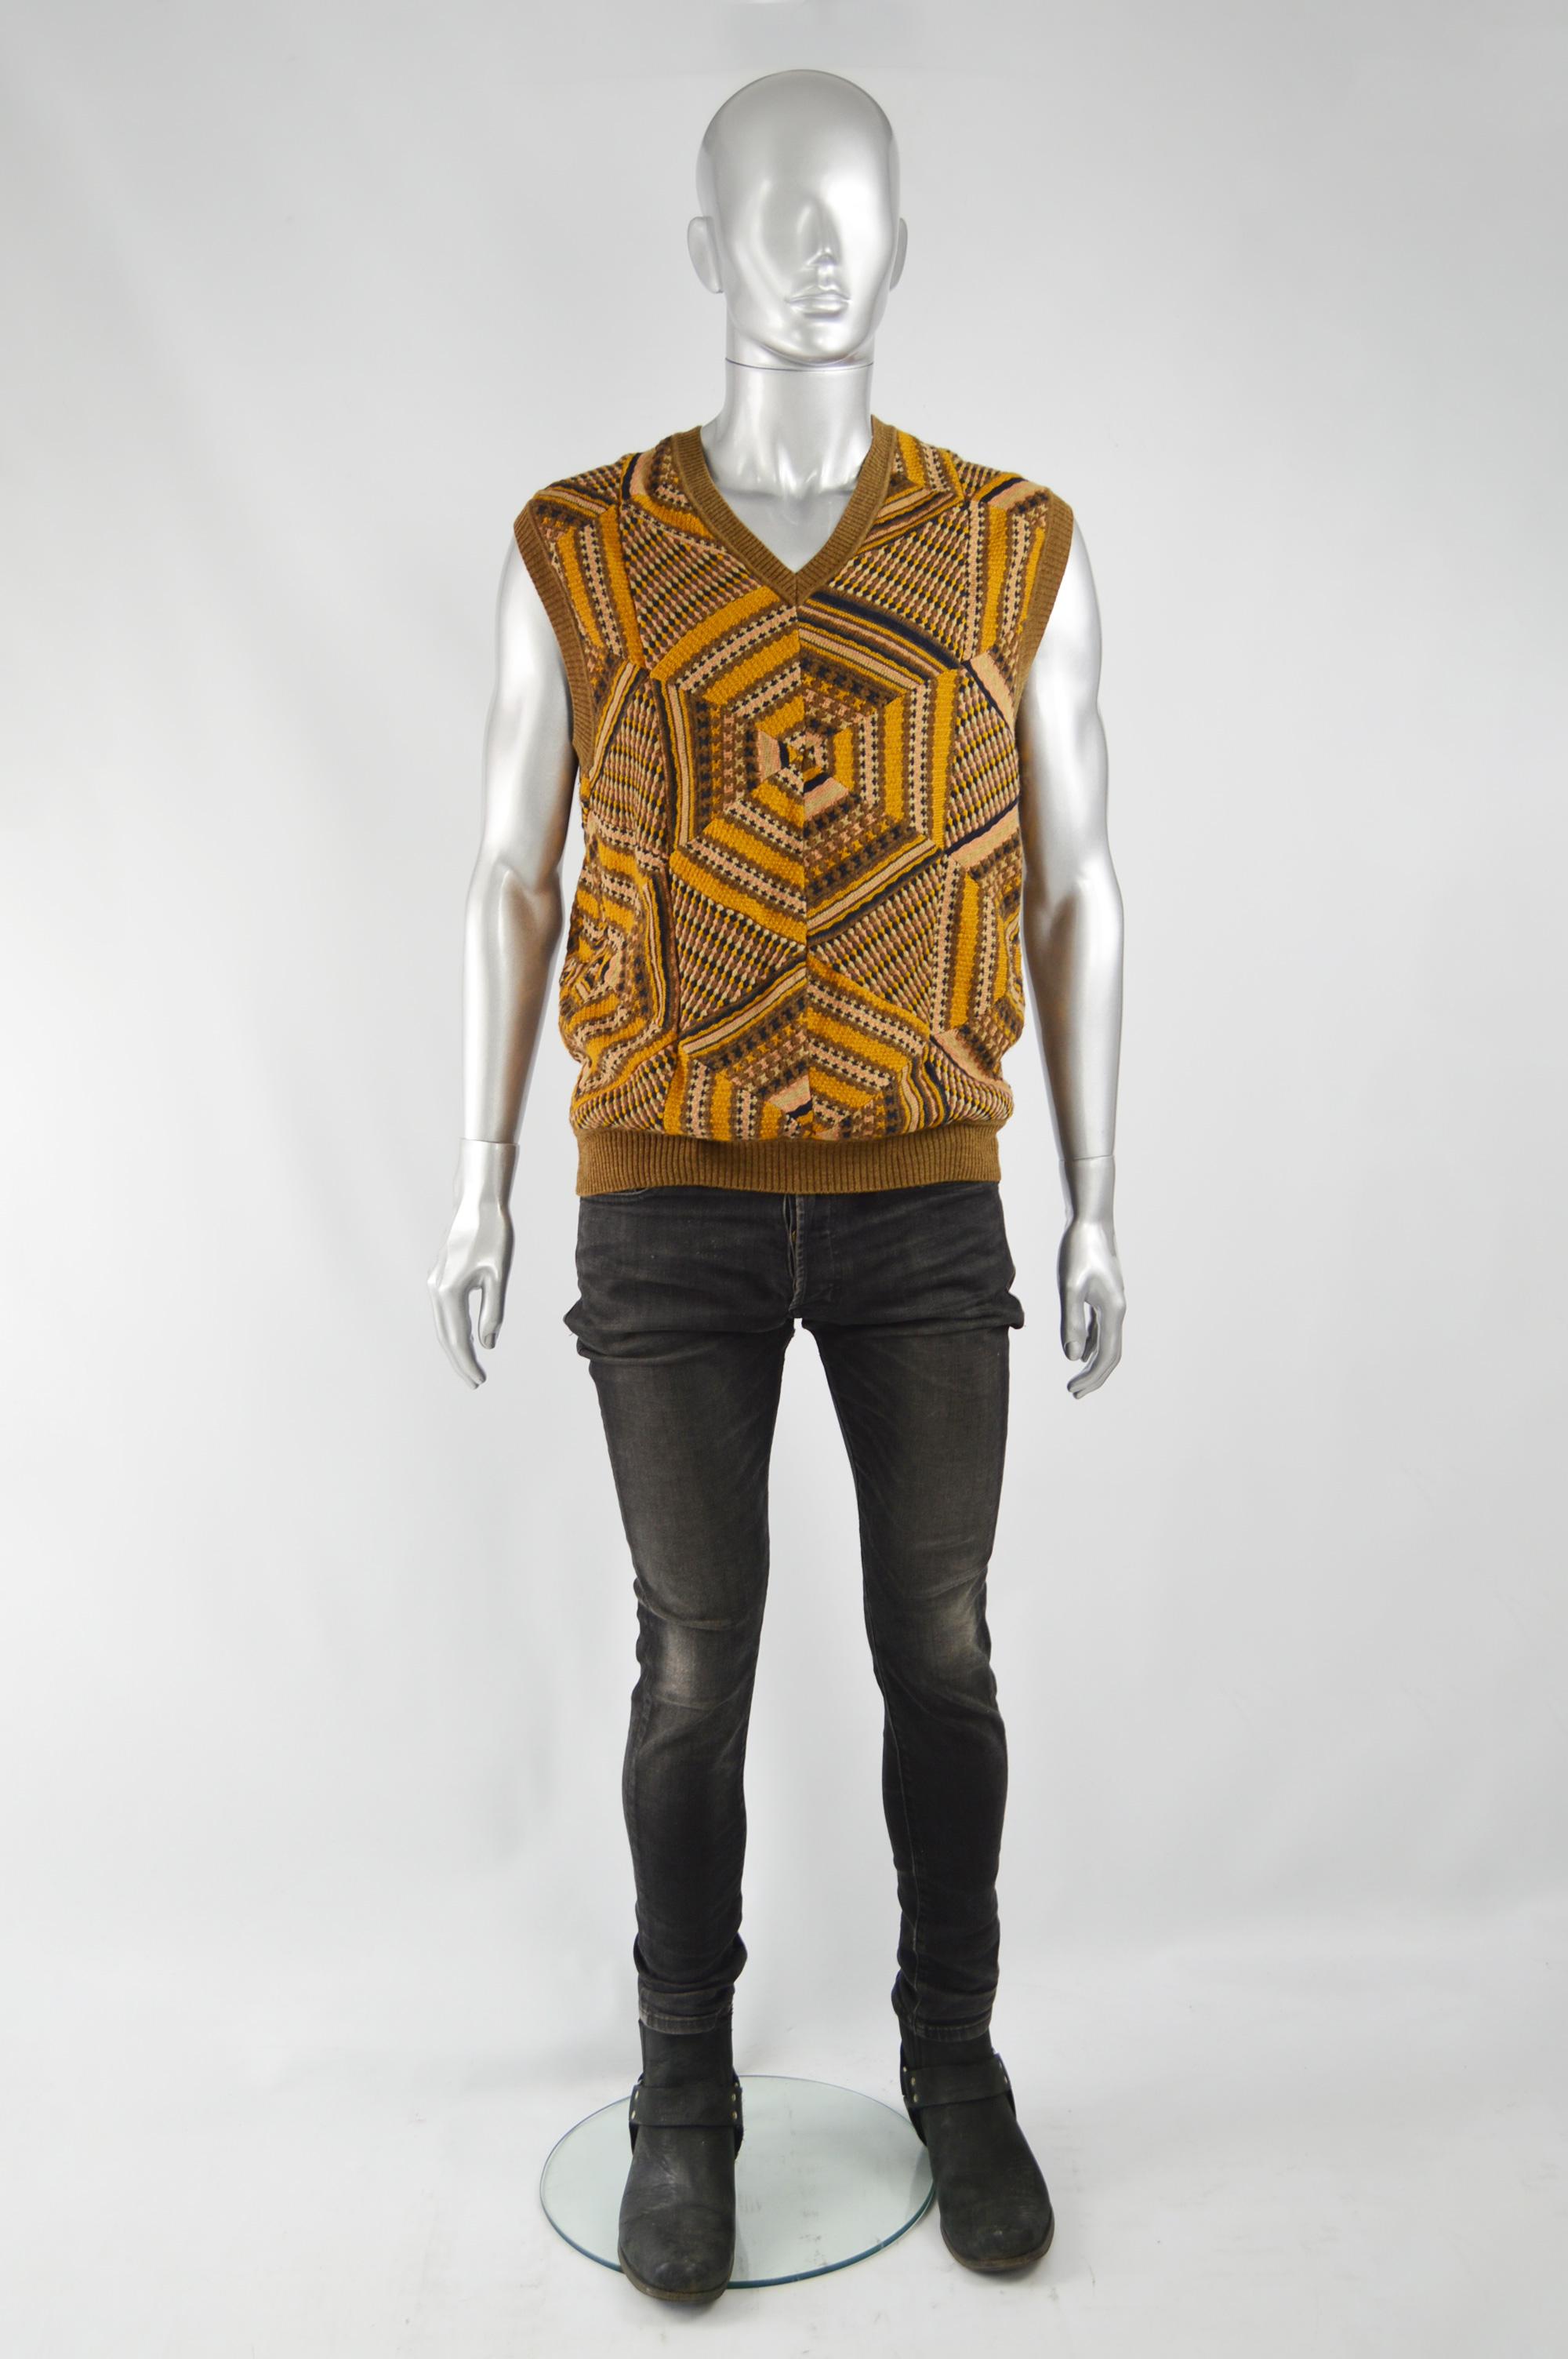 A stylish men's Missoni sweater vest. As part of the Missoni Collectible line this sleeveless jumper is very rare, this is number 14 of only 50 made of this design. In a geometric, hexagonal patchwork of different wool knit fabrics which give an